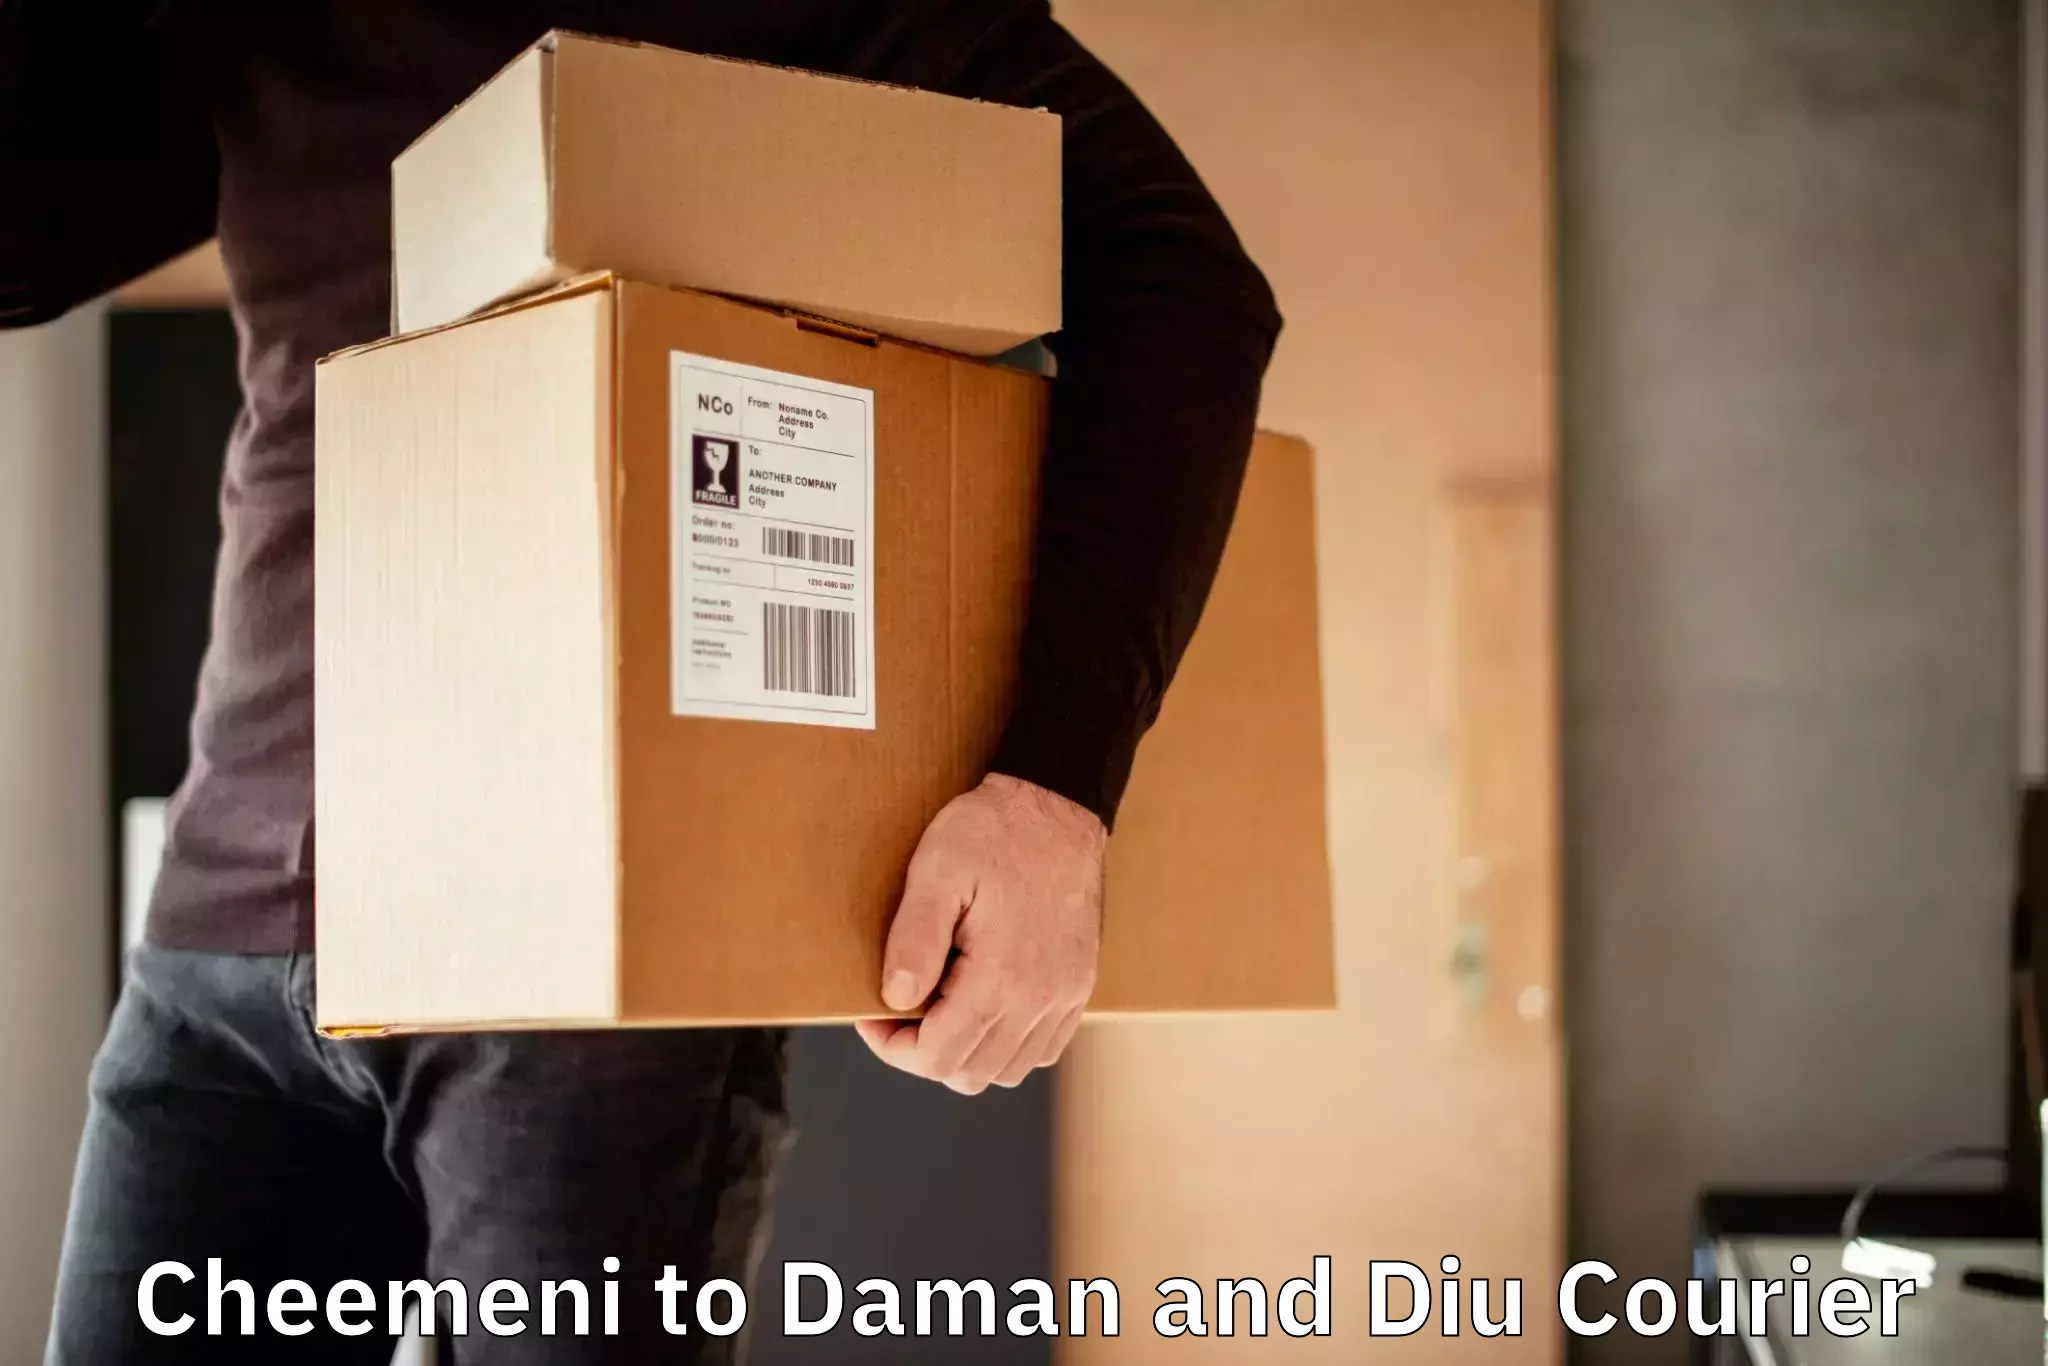 Automated parcel services Cheemeni to Daman and Diu